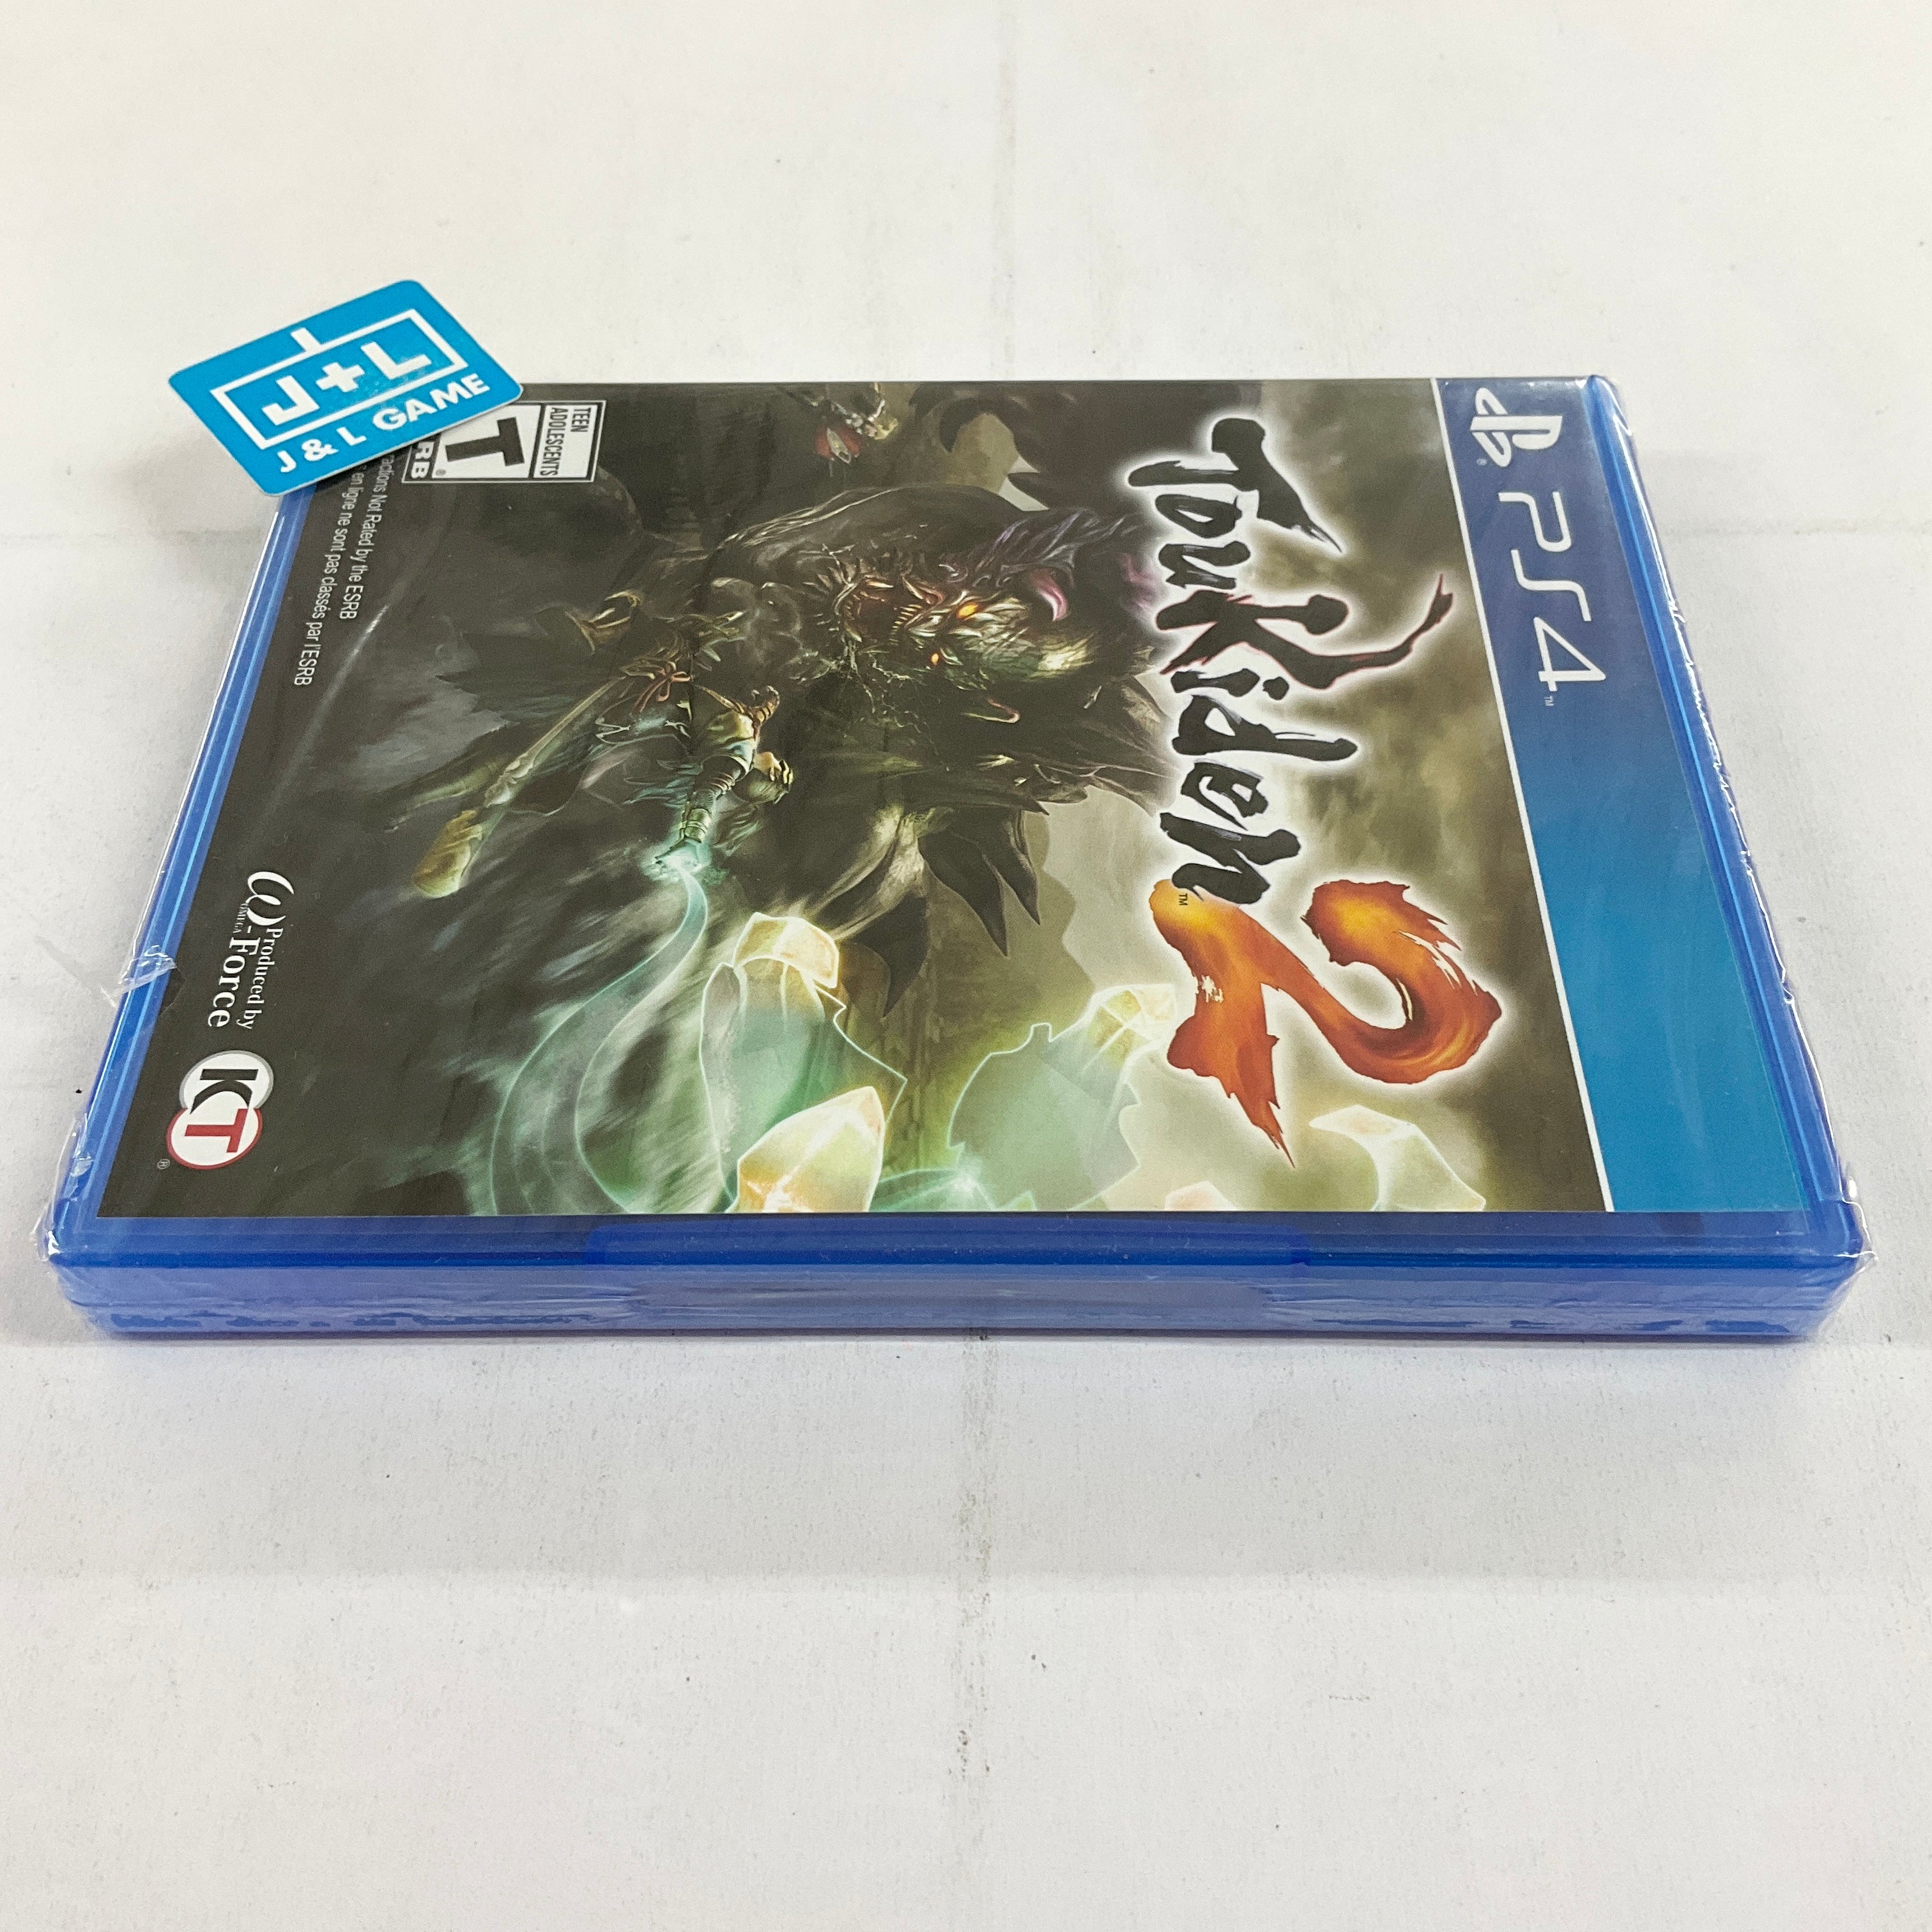 Toukiden 2 - (PS4) PlayStation 4 Video Games Koei Tecmo Games   